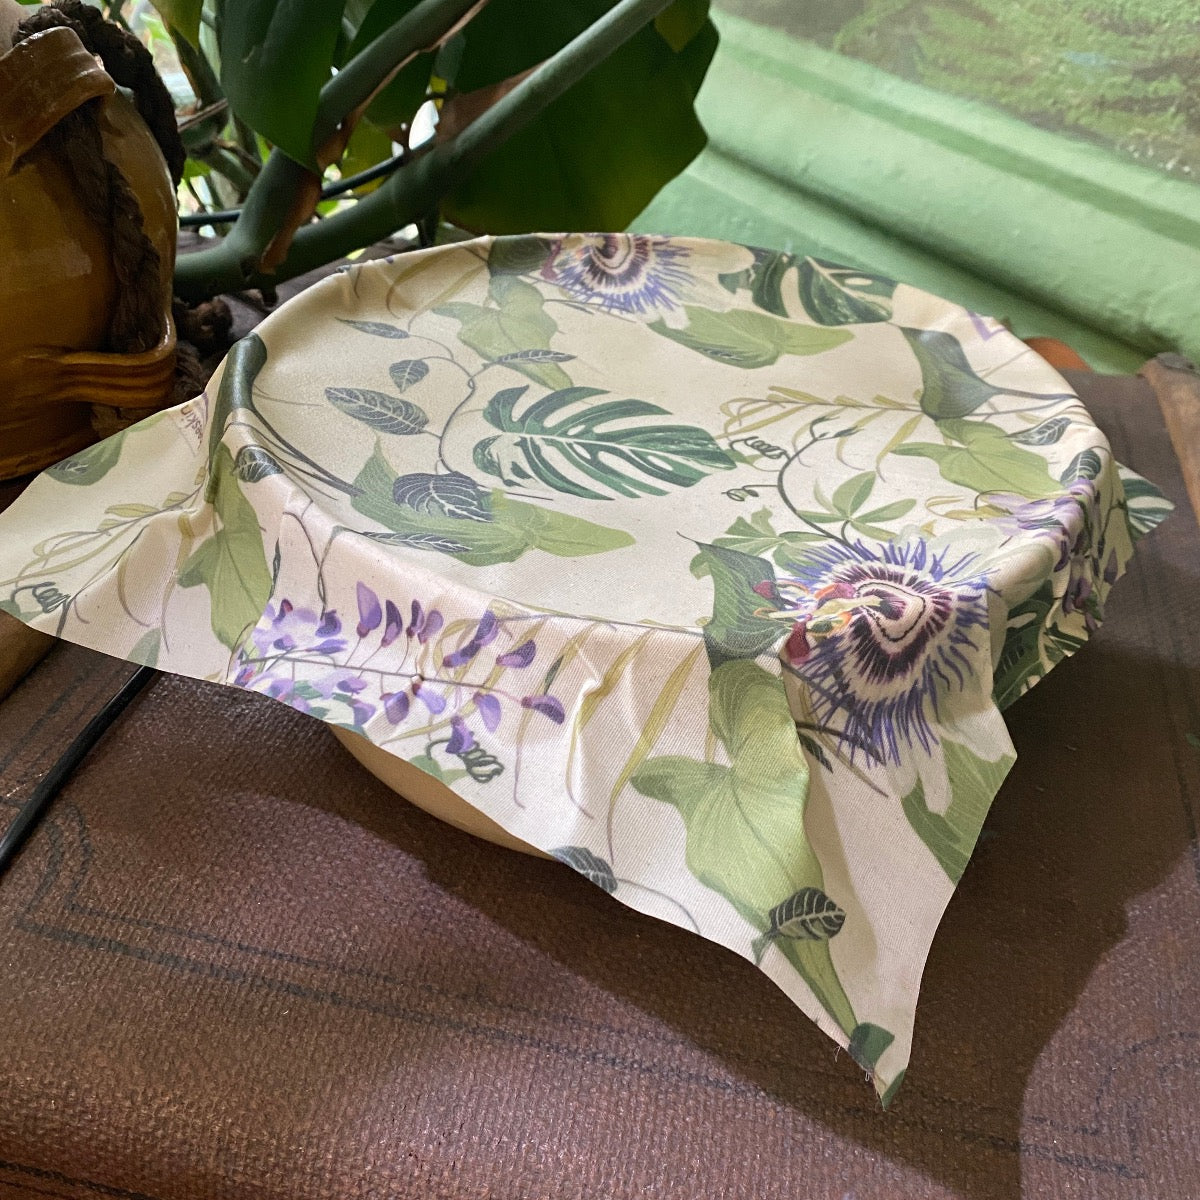 beeskin beeswax wrap passionflower covers a bowl